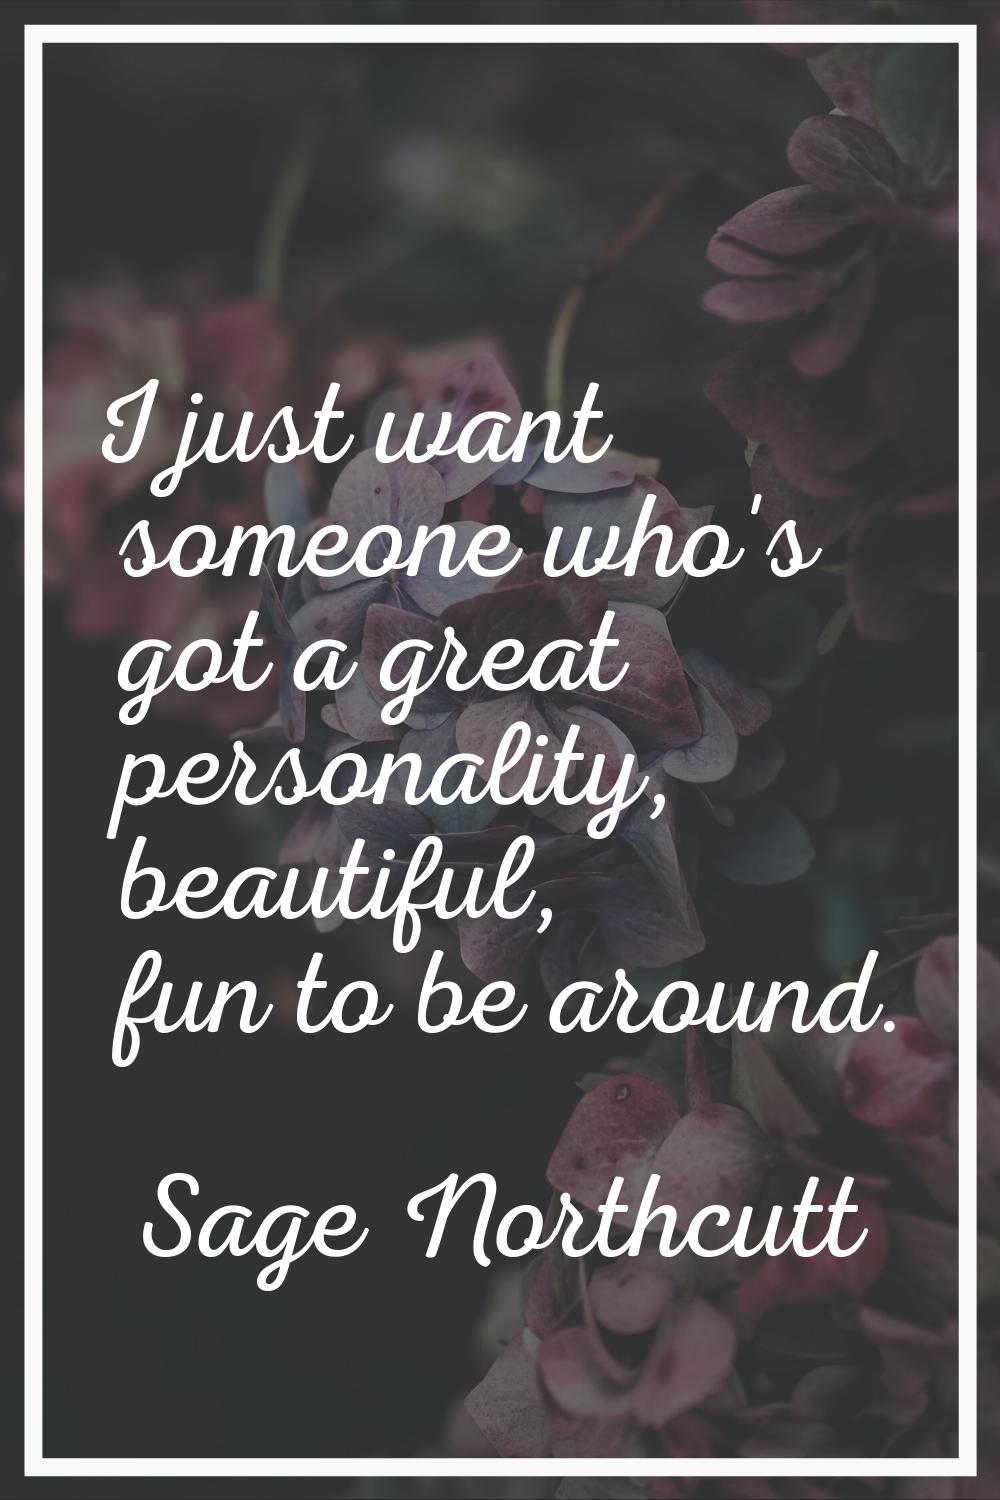 I just want someone who's got a great personality, beautiful, fun to be around.